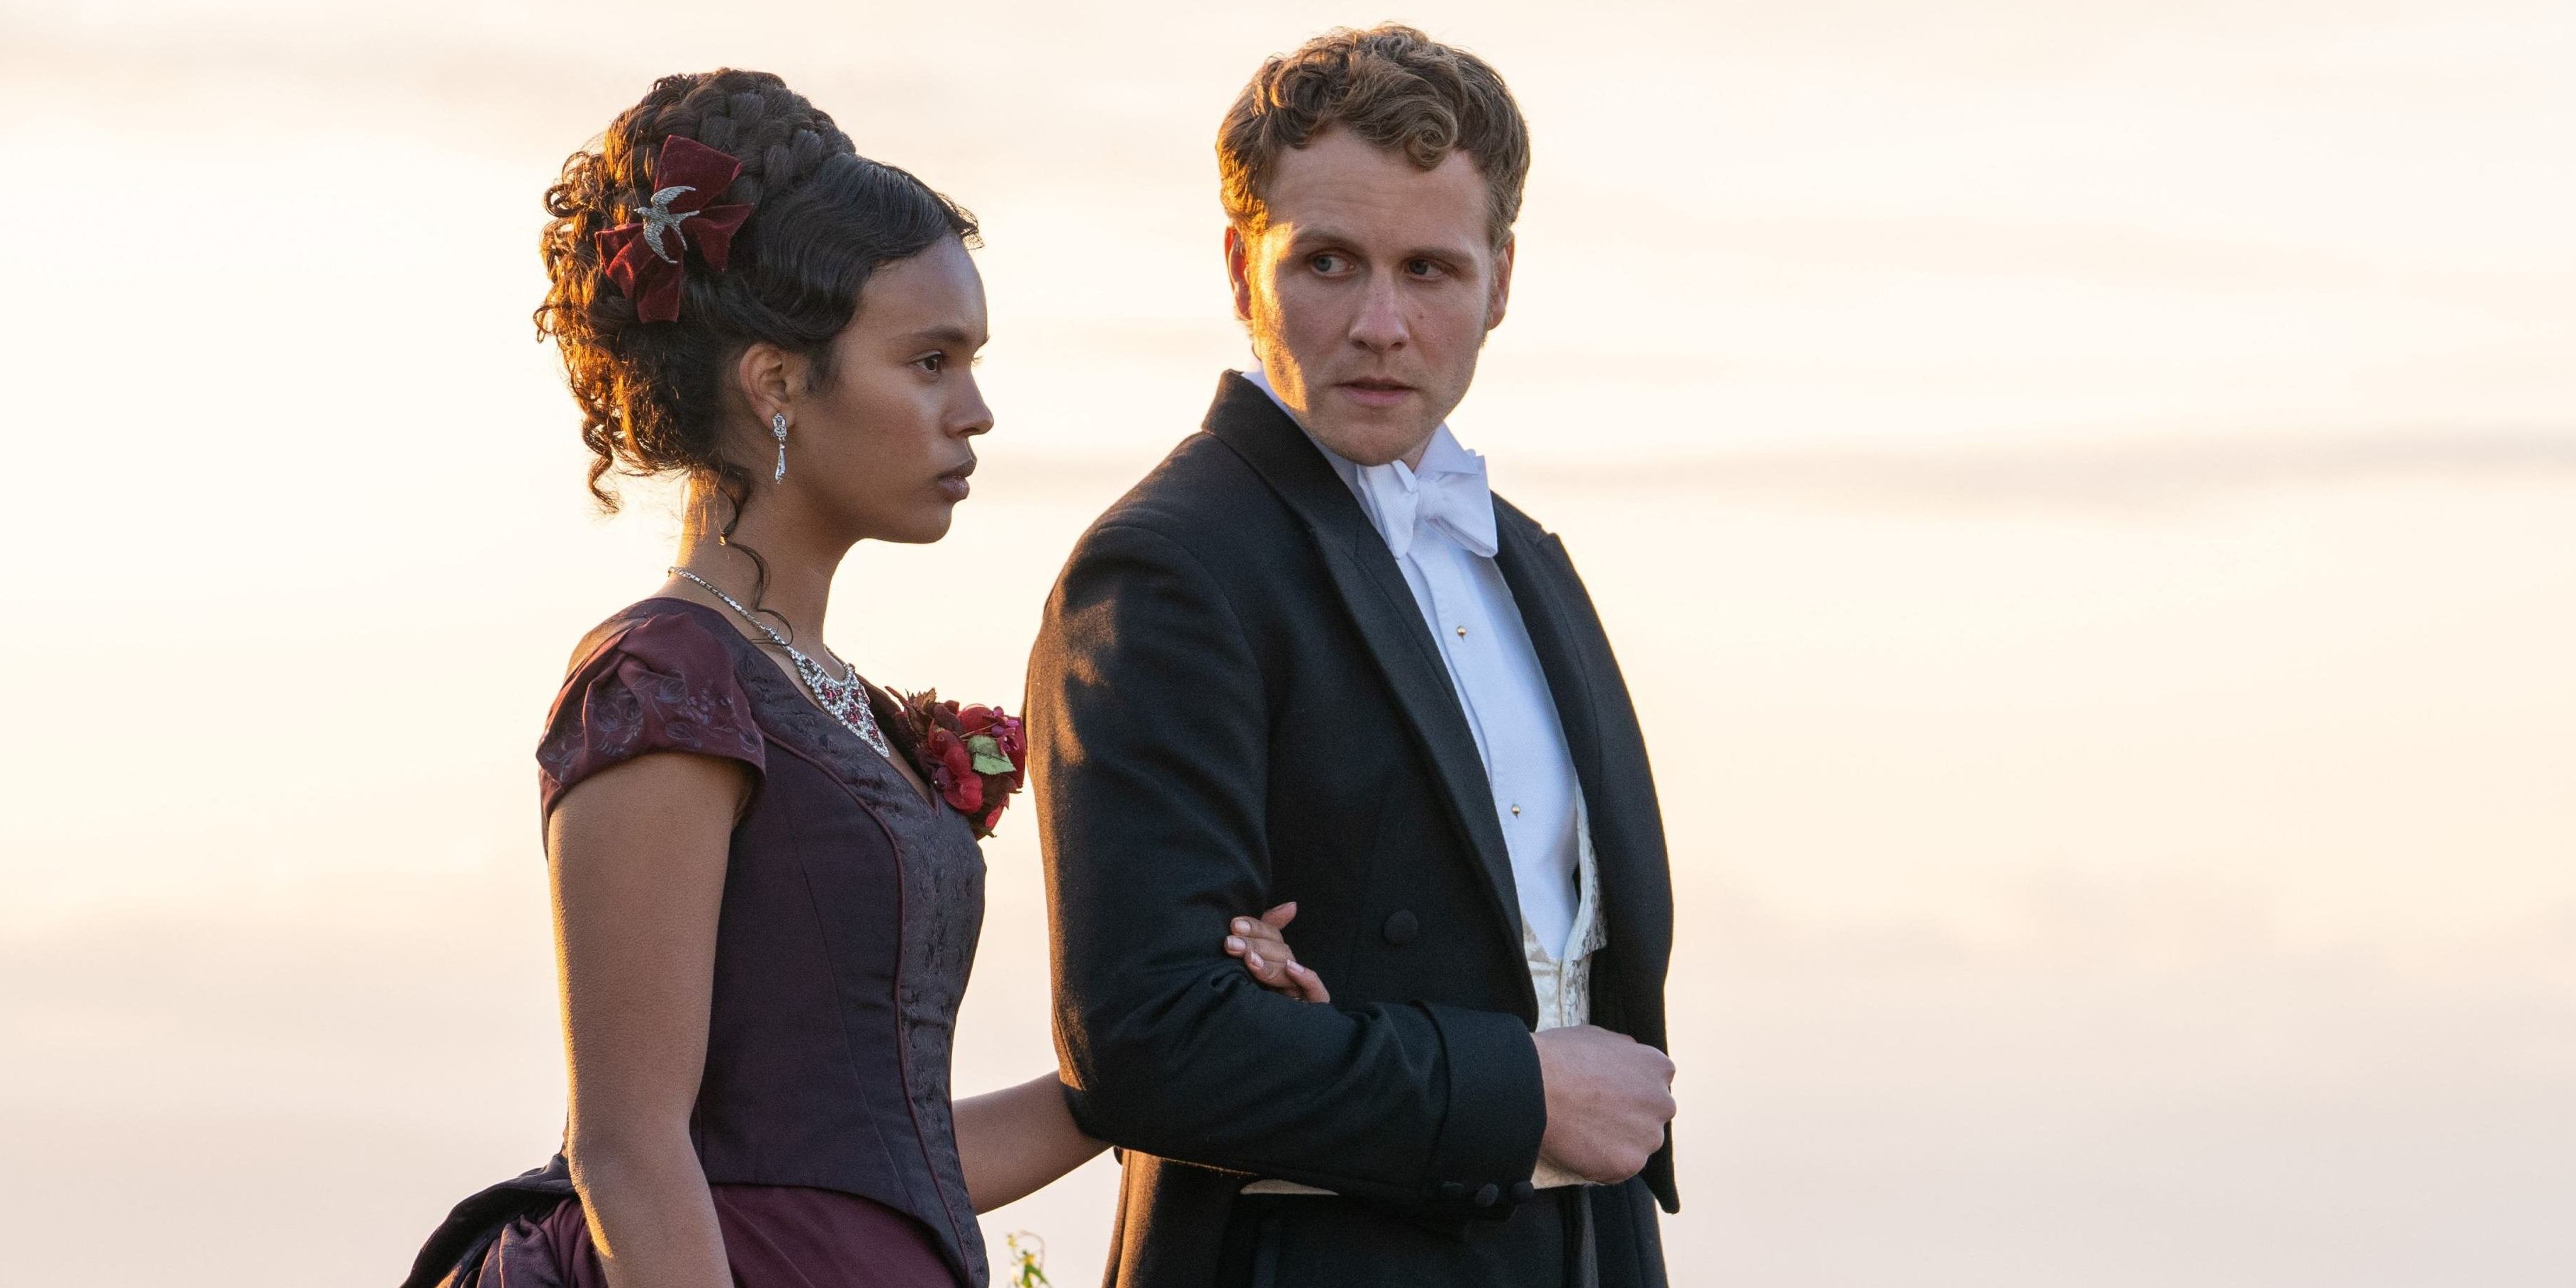 Alisha Boe as Conchitta holds the arm of Josh Dylan as Richard in The Buccaneers